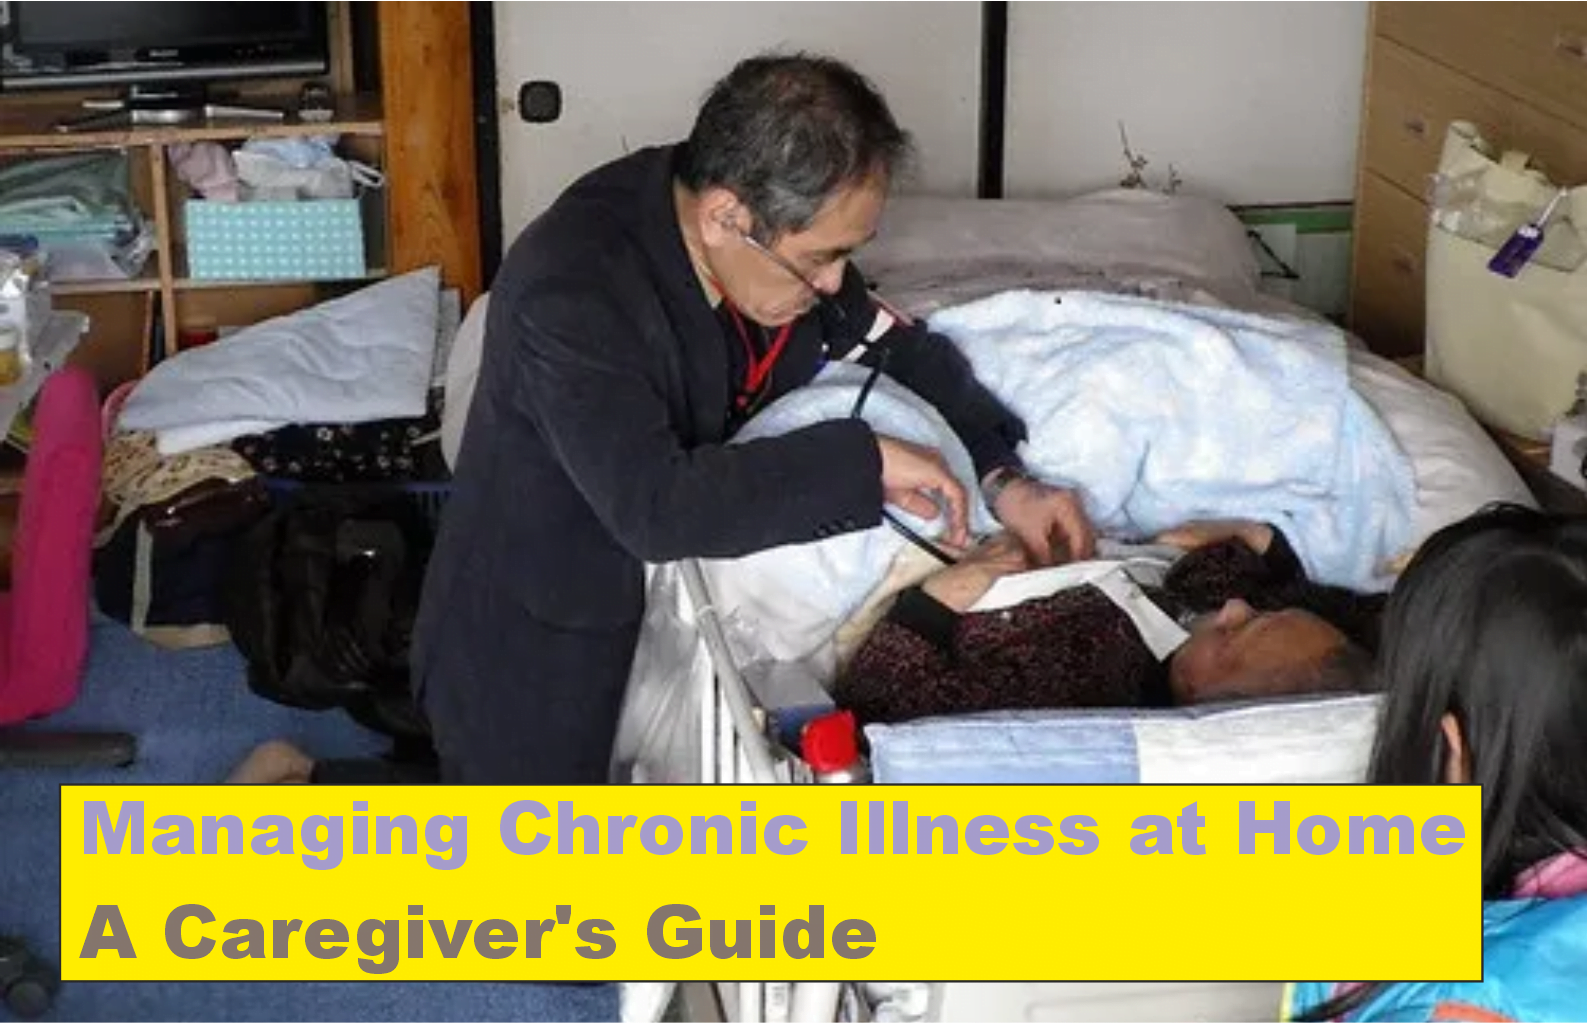 Managing Chronic Illness at Home: A Caregiver's Guide